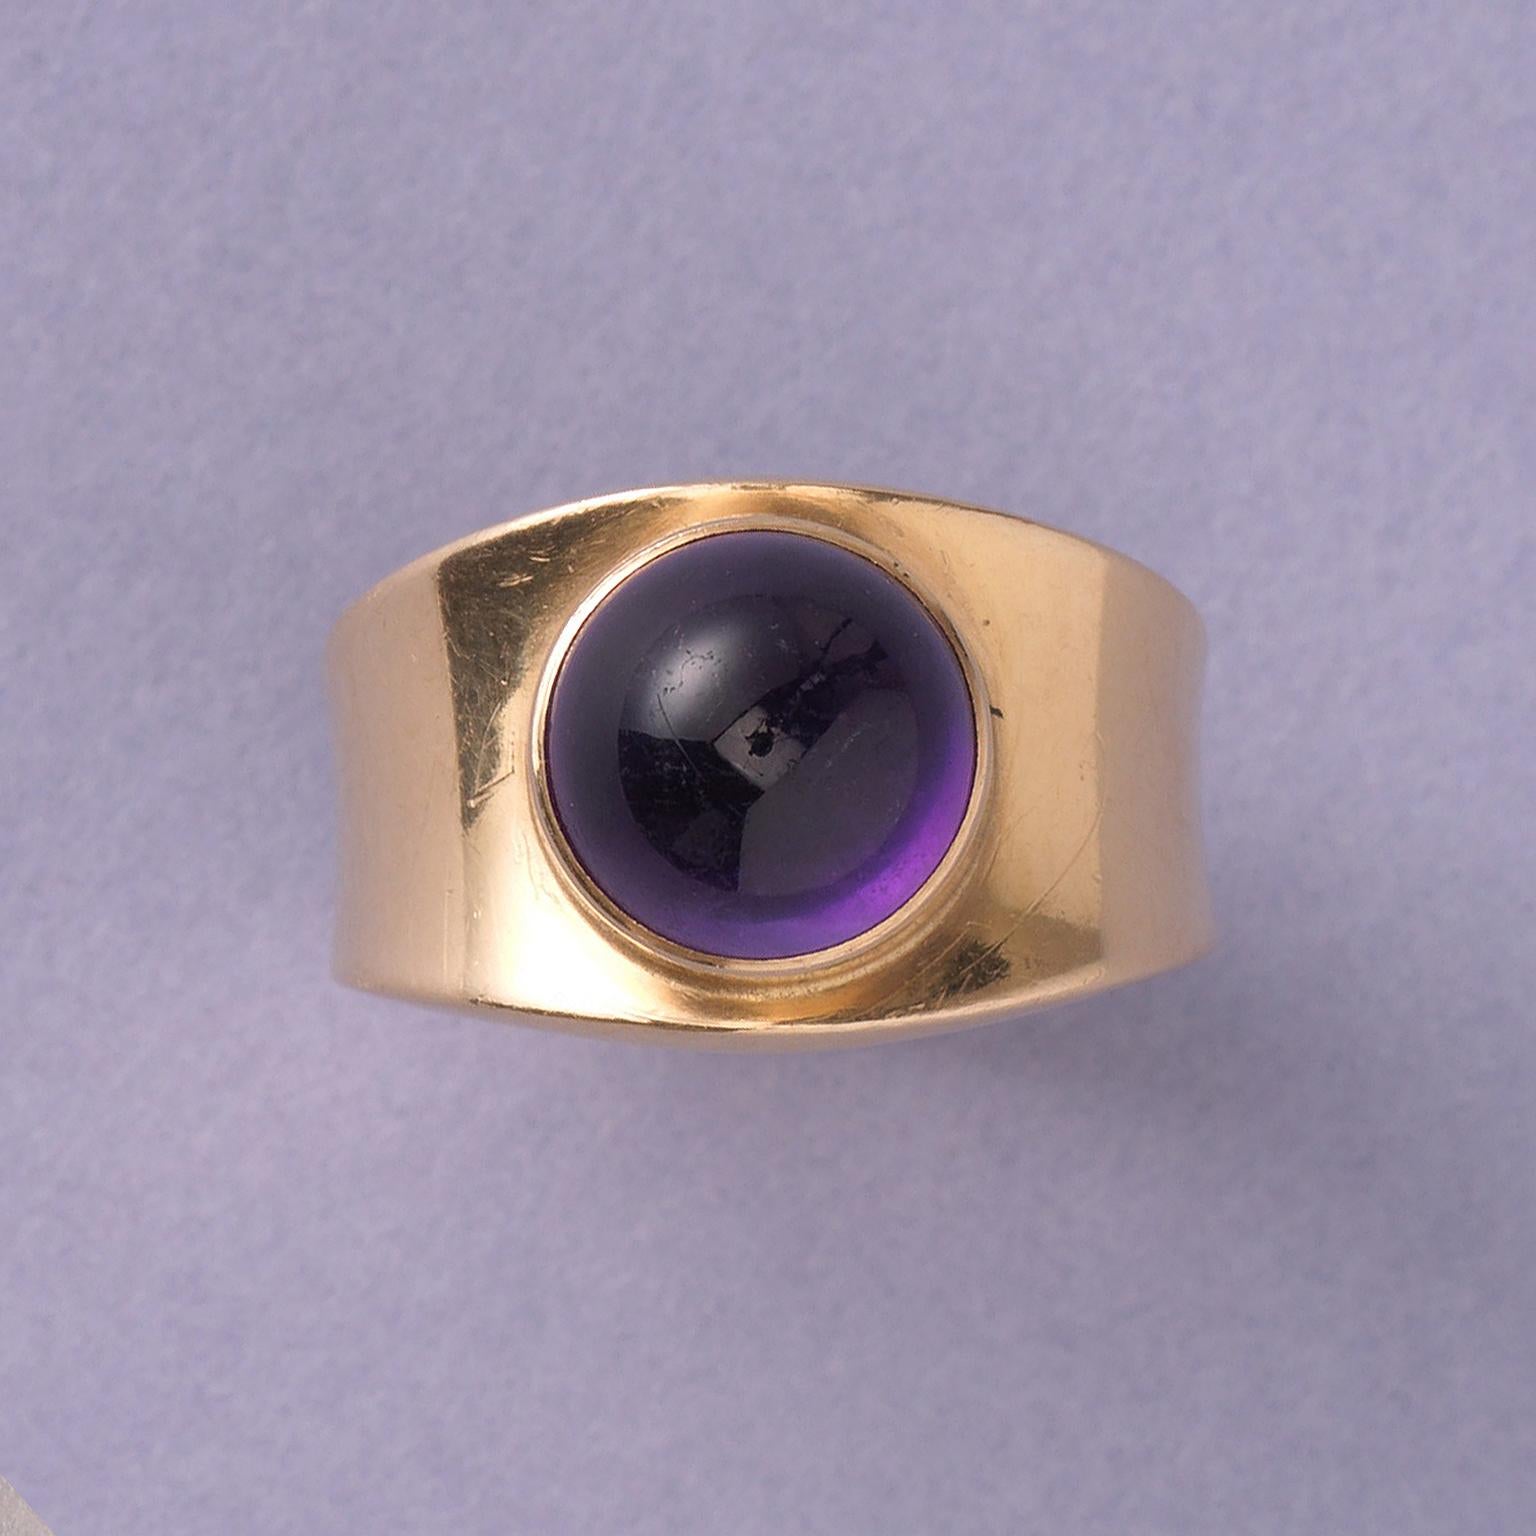 An 18 carat yellow gold band ring set with a cabochon cut amethyst, signed and numbered: Georg Jensen, 1124, Denmark, 1967. 

weight 9.86 grams
width: 2 cm
ring size: 16.75 mm / 6 1/4 US